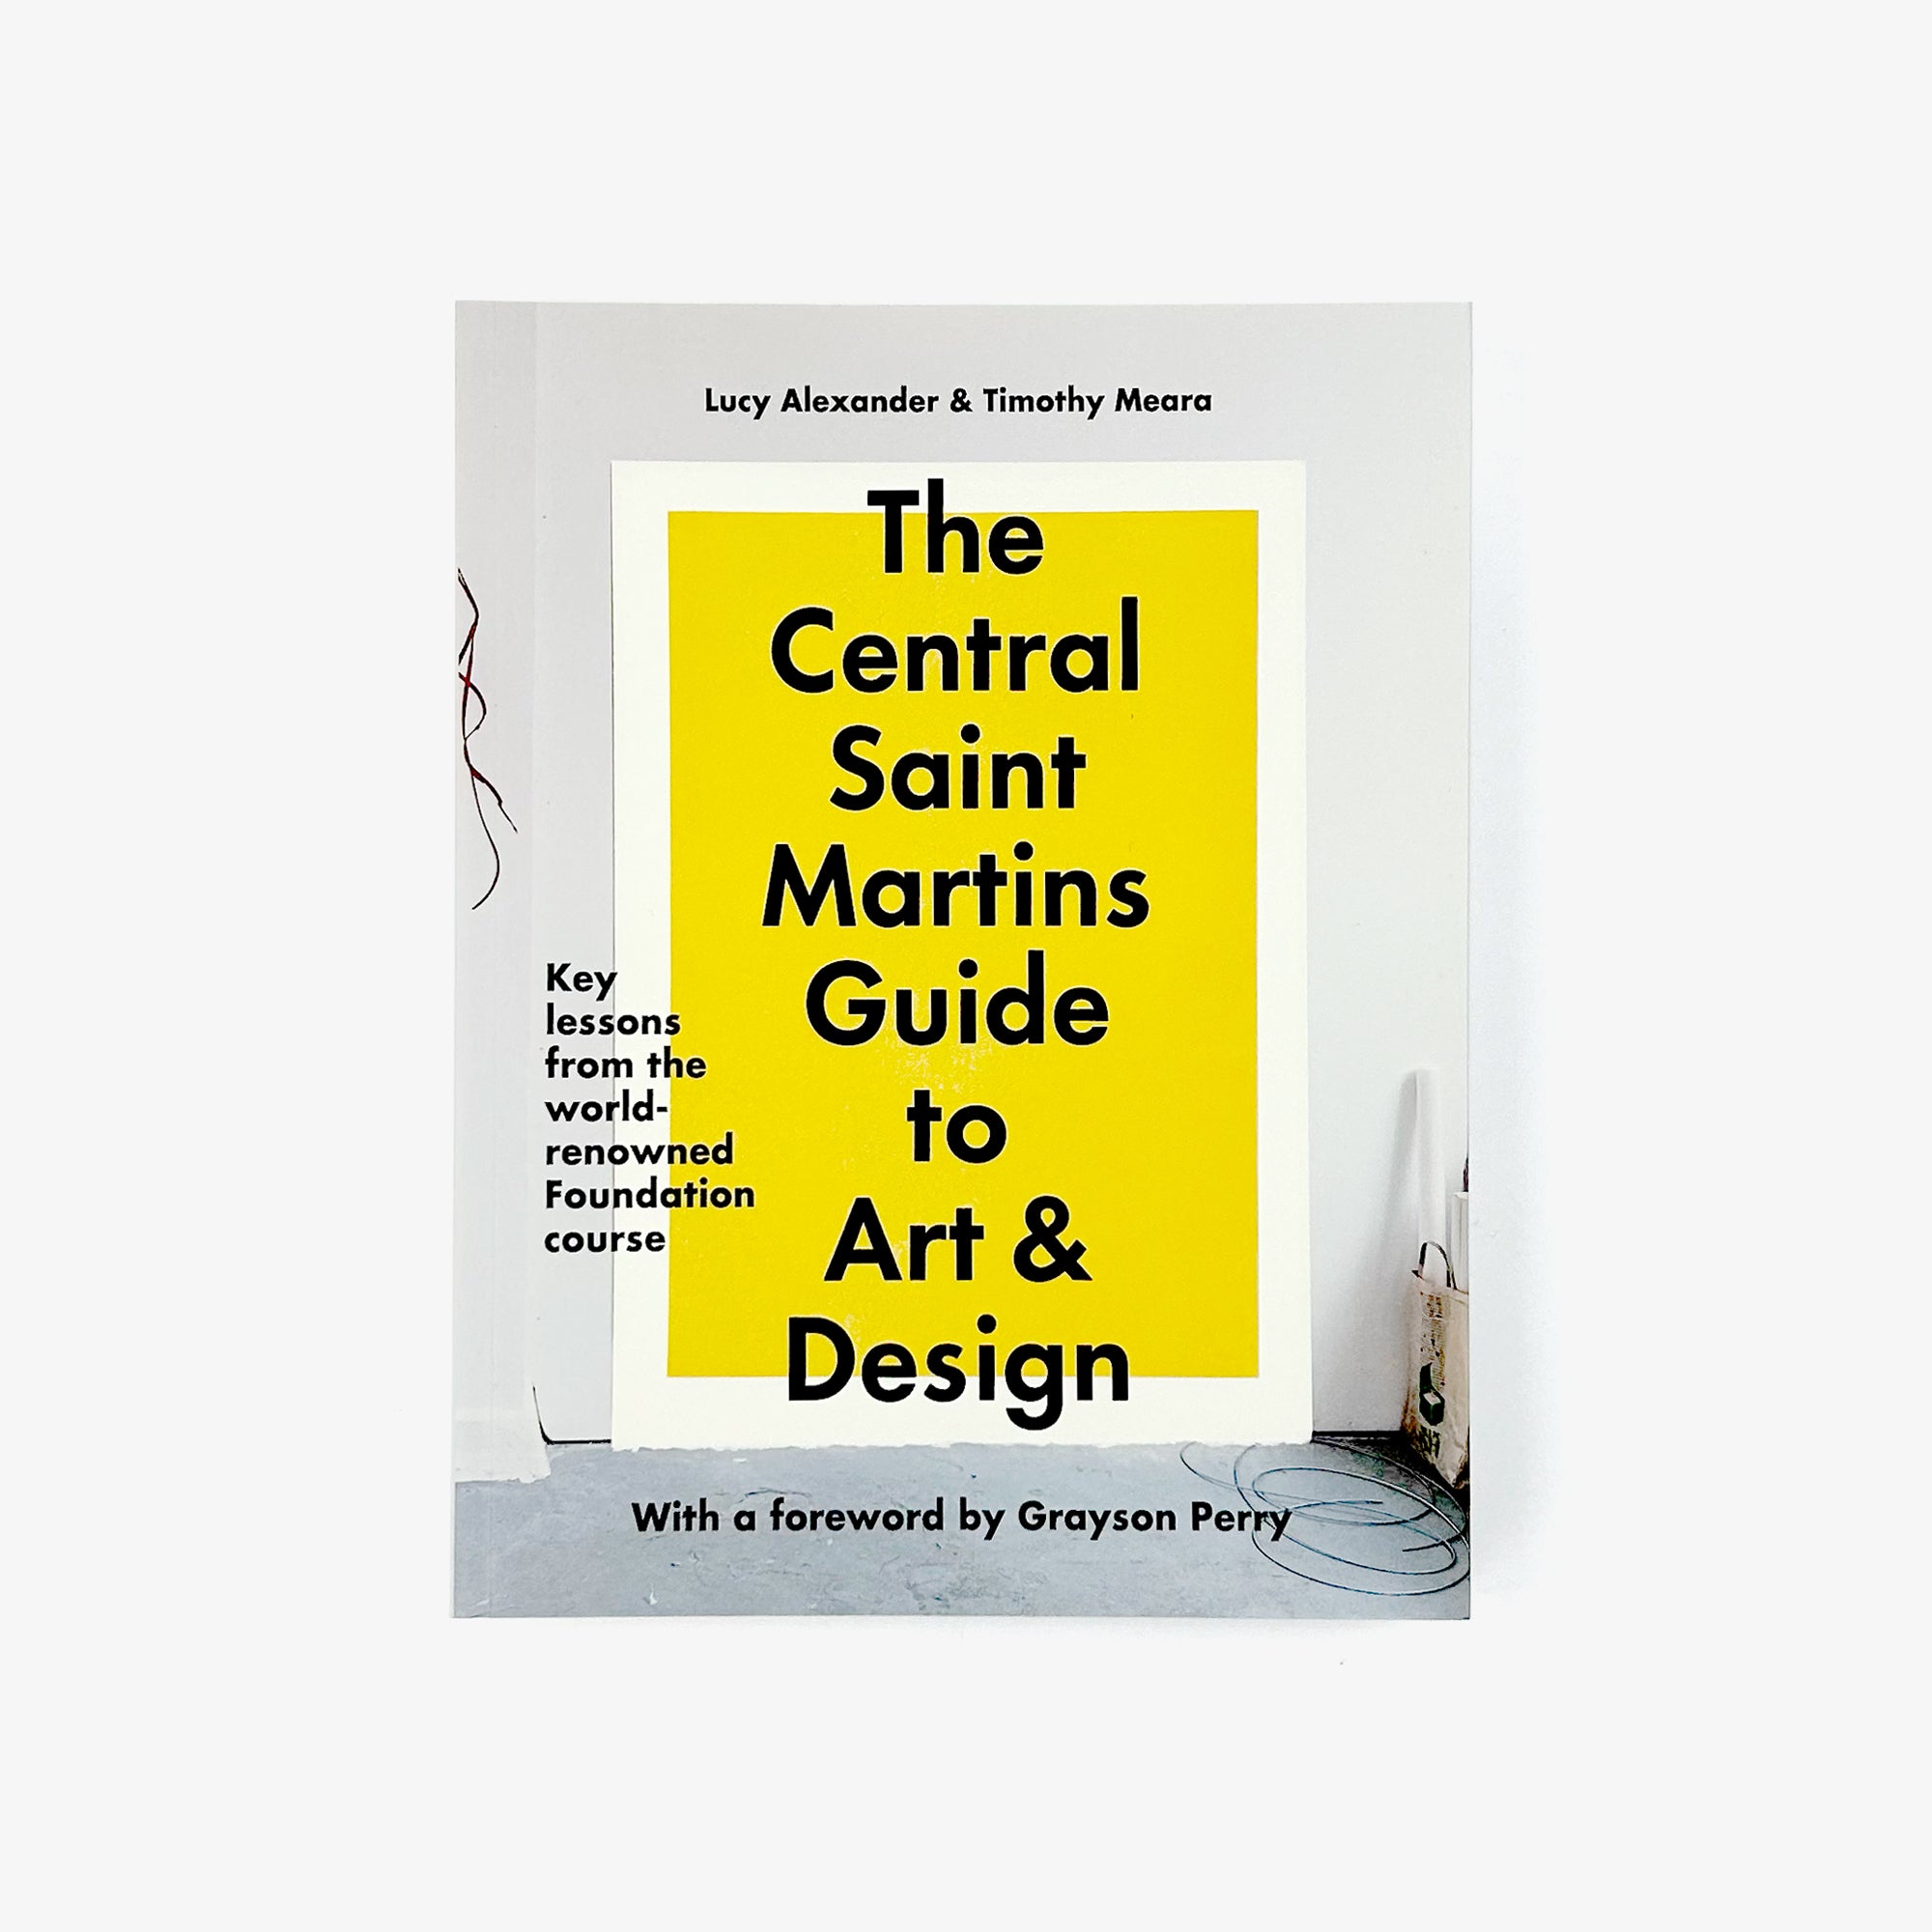 The Central Saint Martins Guide